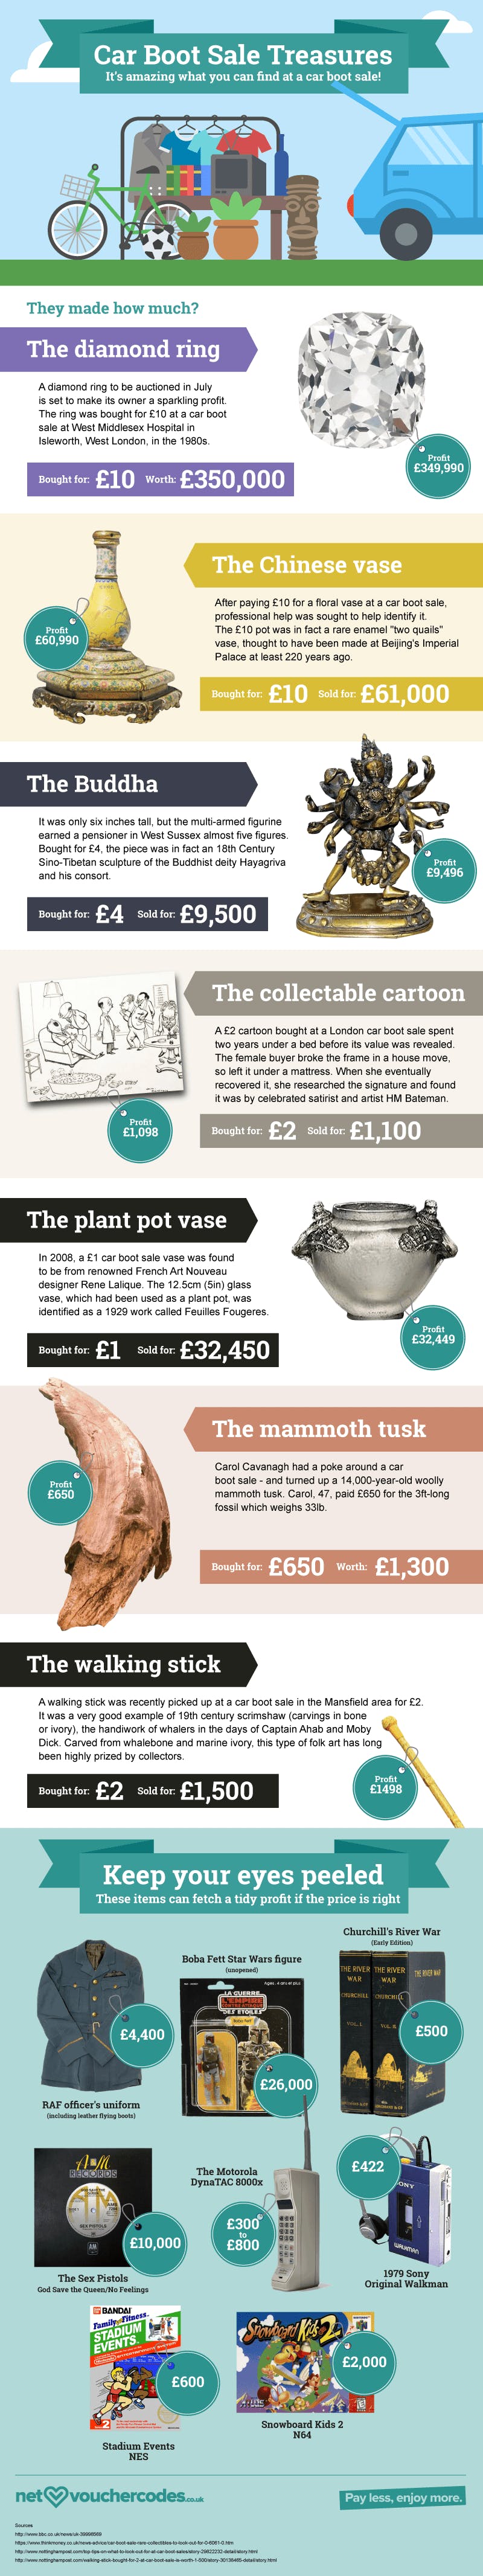 Car-boot-treasures-infographic